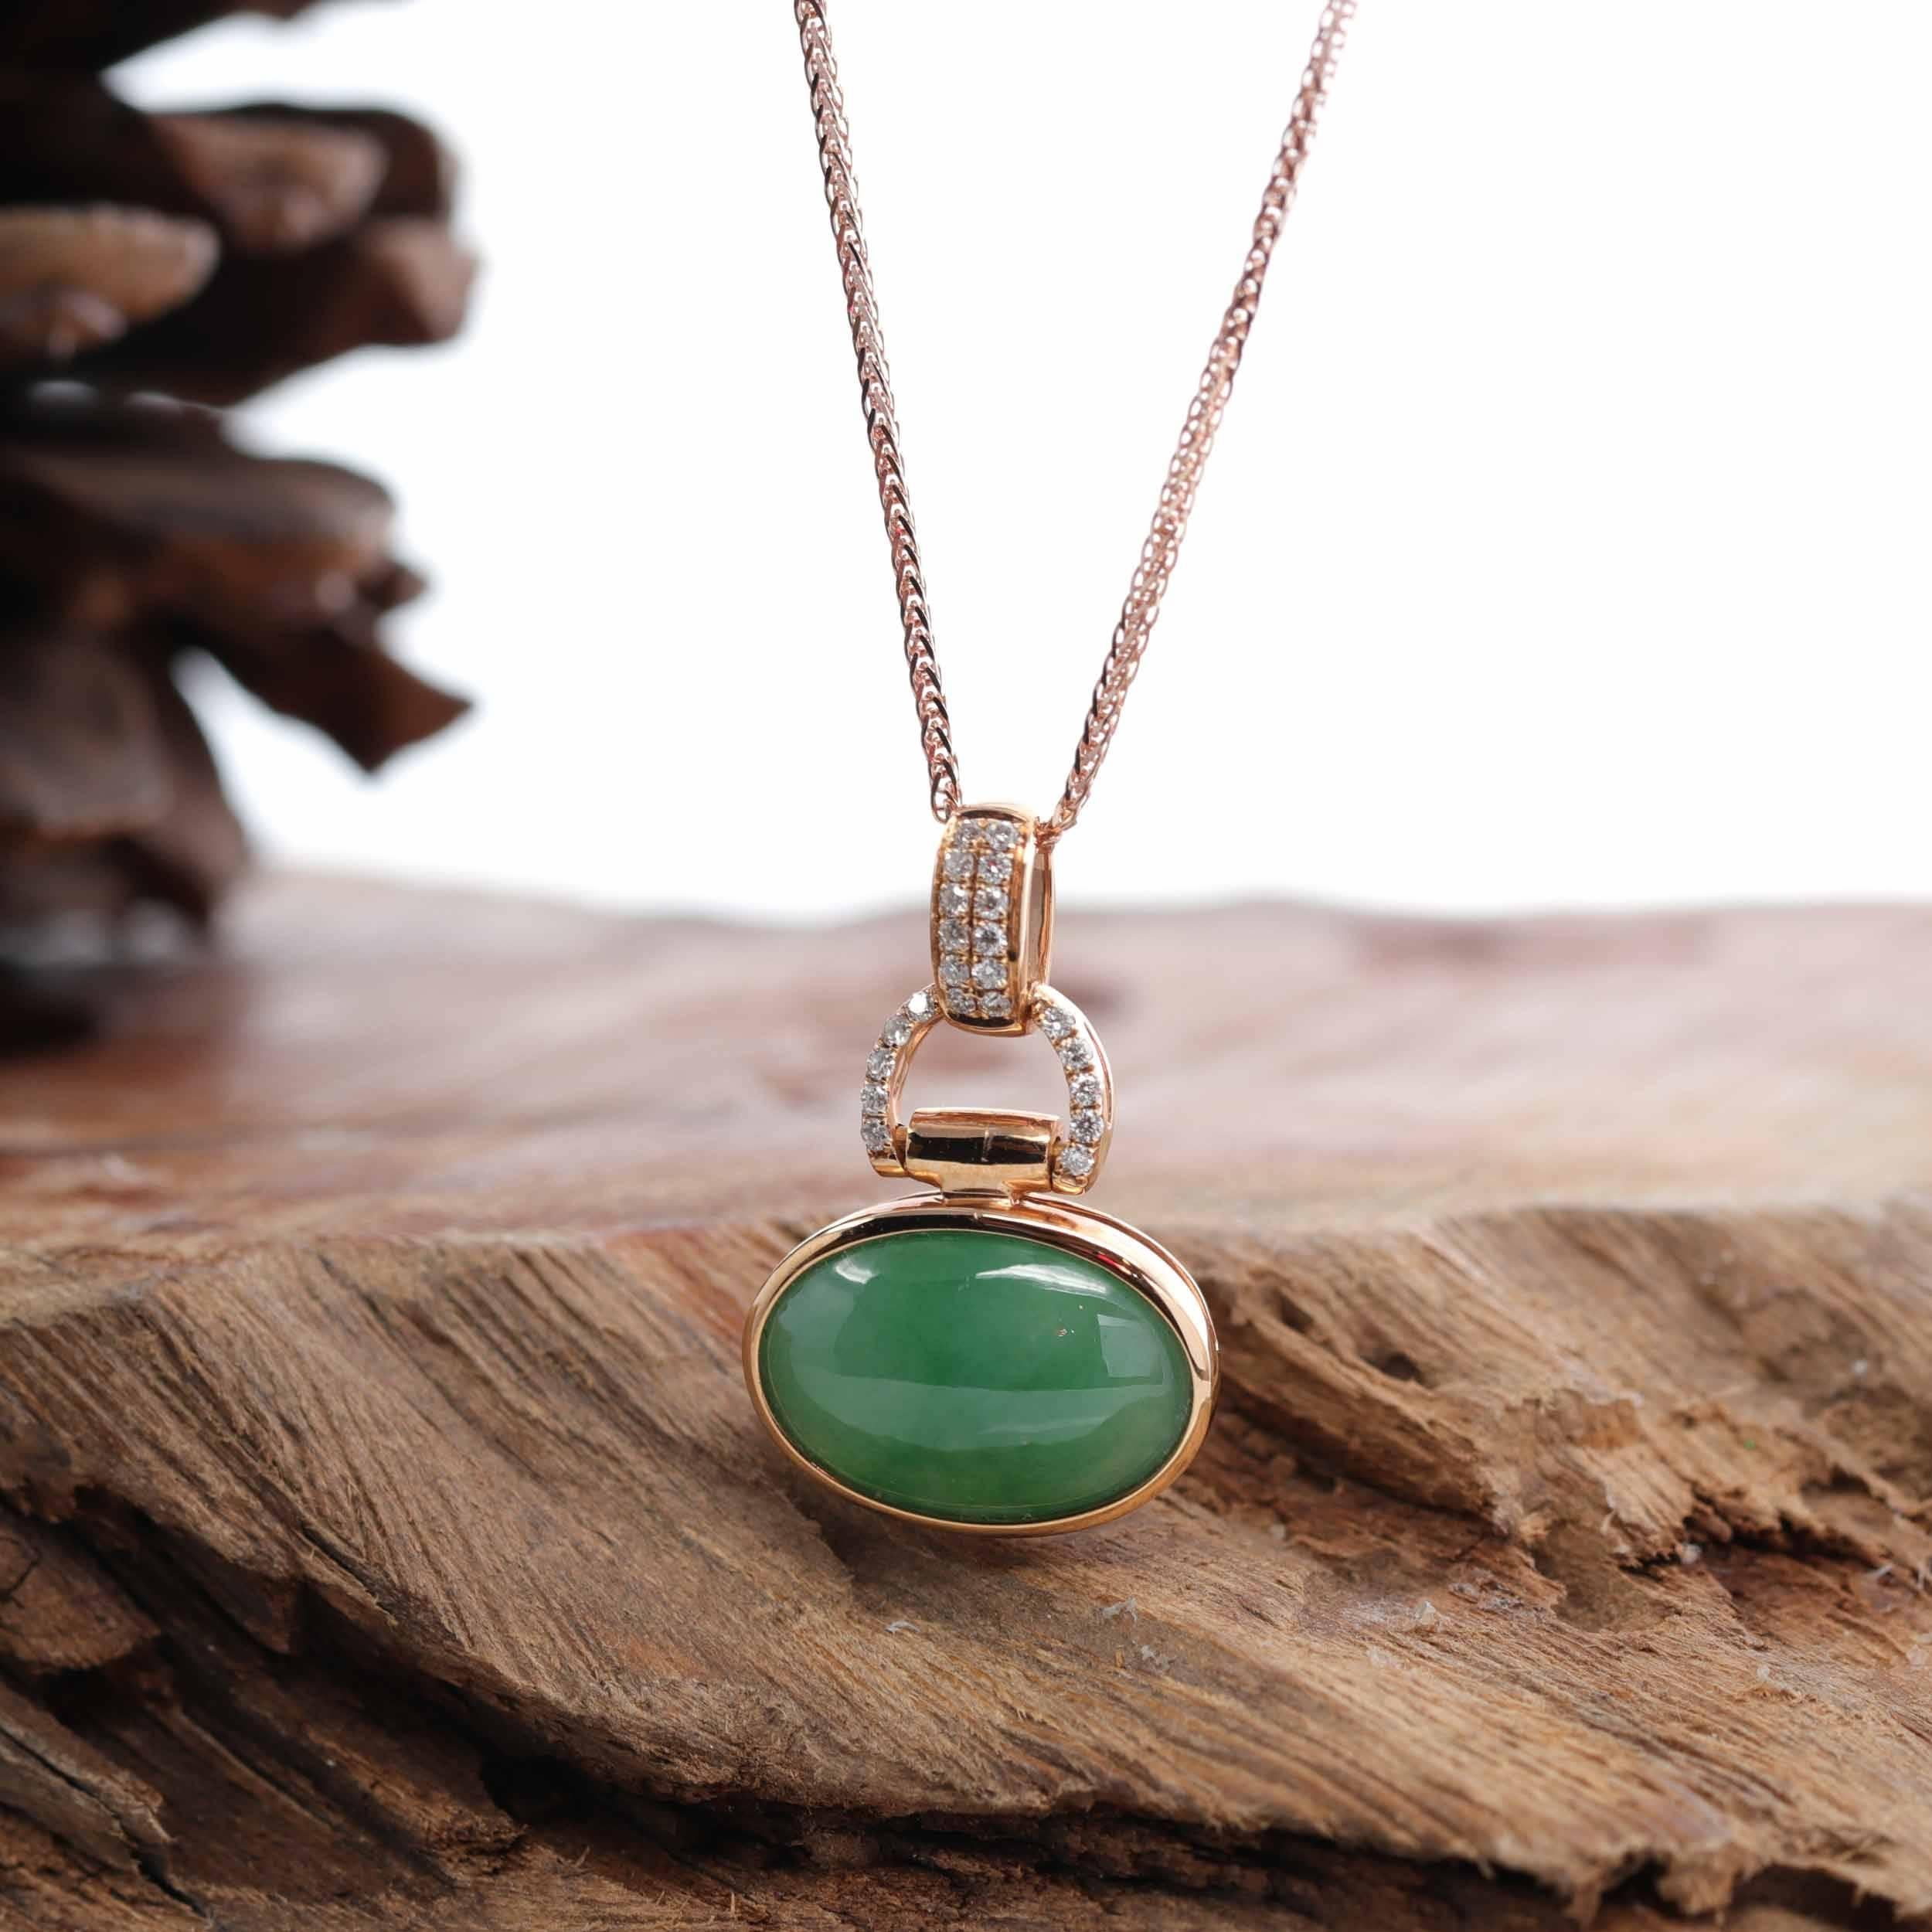 * DESIGN CONCEPT--- This necklace is made with an imperial green Burmese jadeite jade cabochon. The design is inspired by the timeless shape of an oval. A modern spin on a timeless design motif. Yet remains elements of tradition. Representing